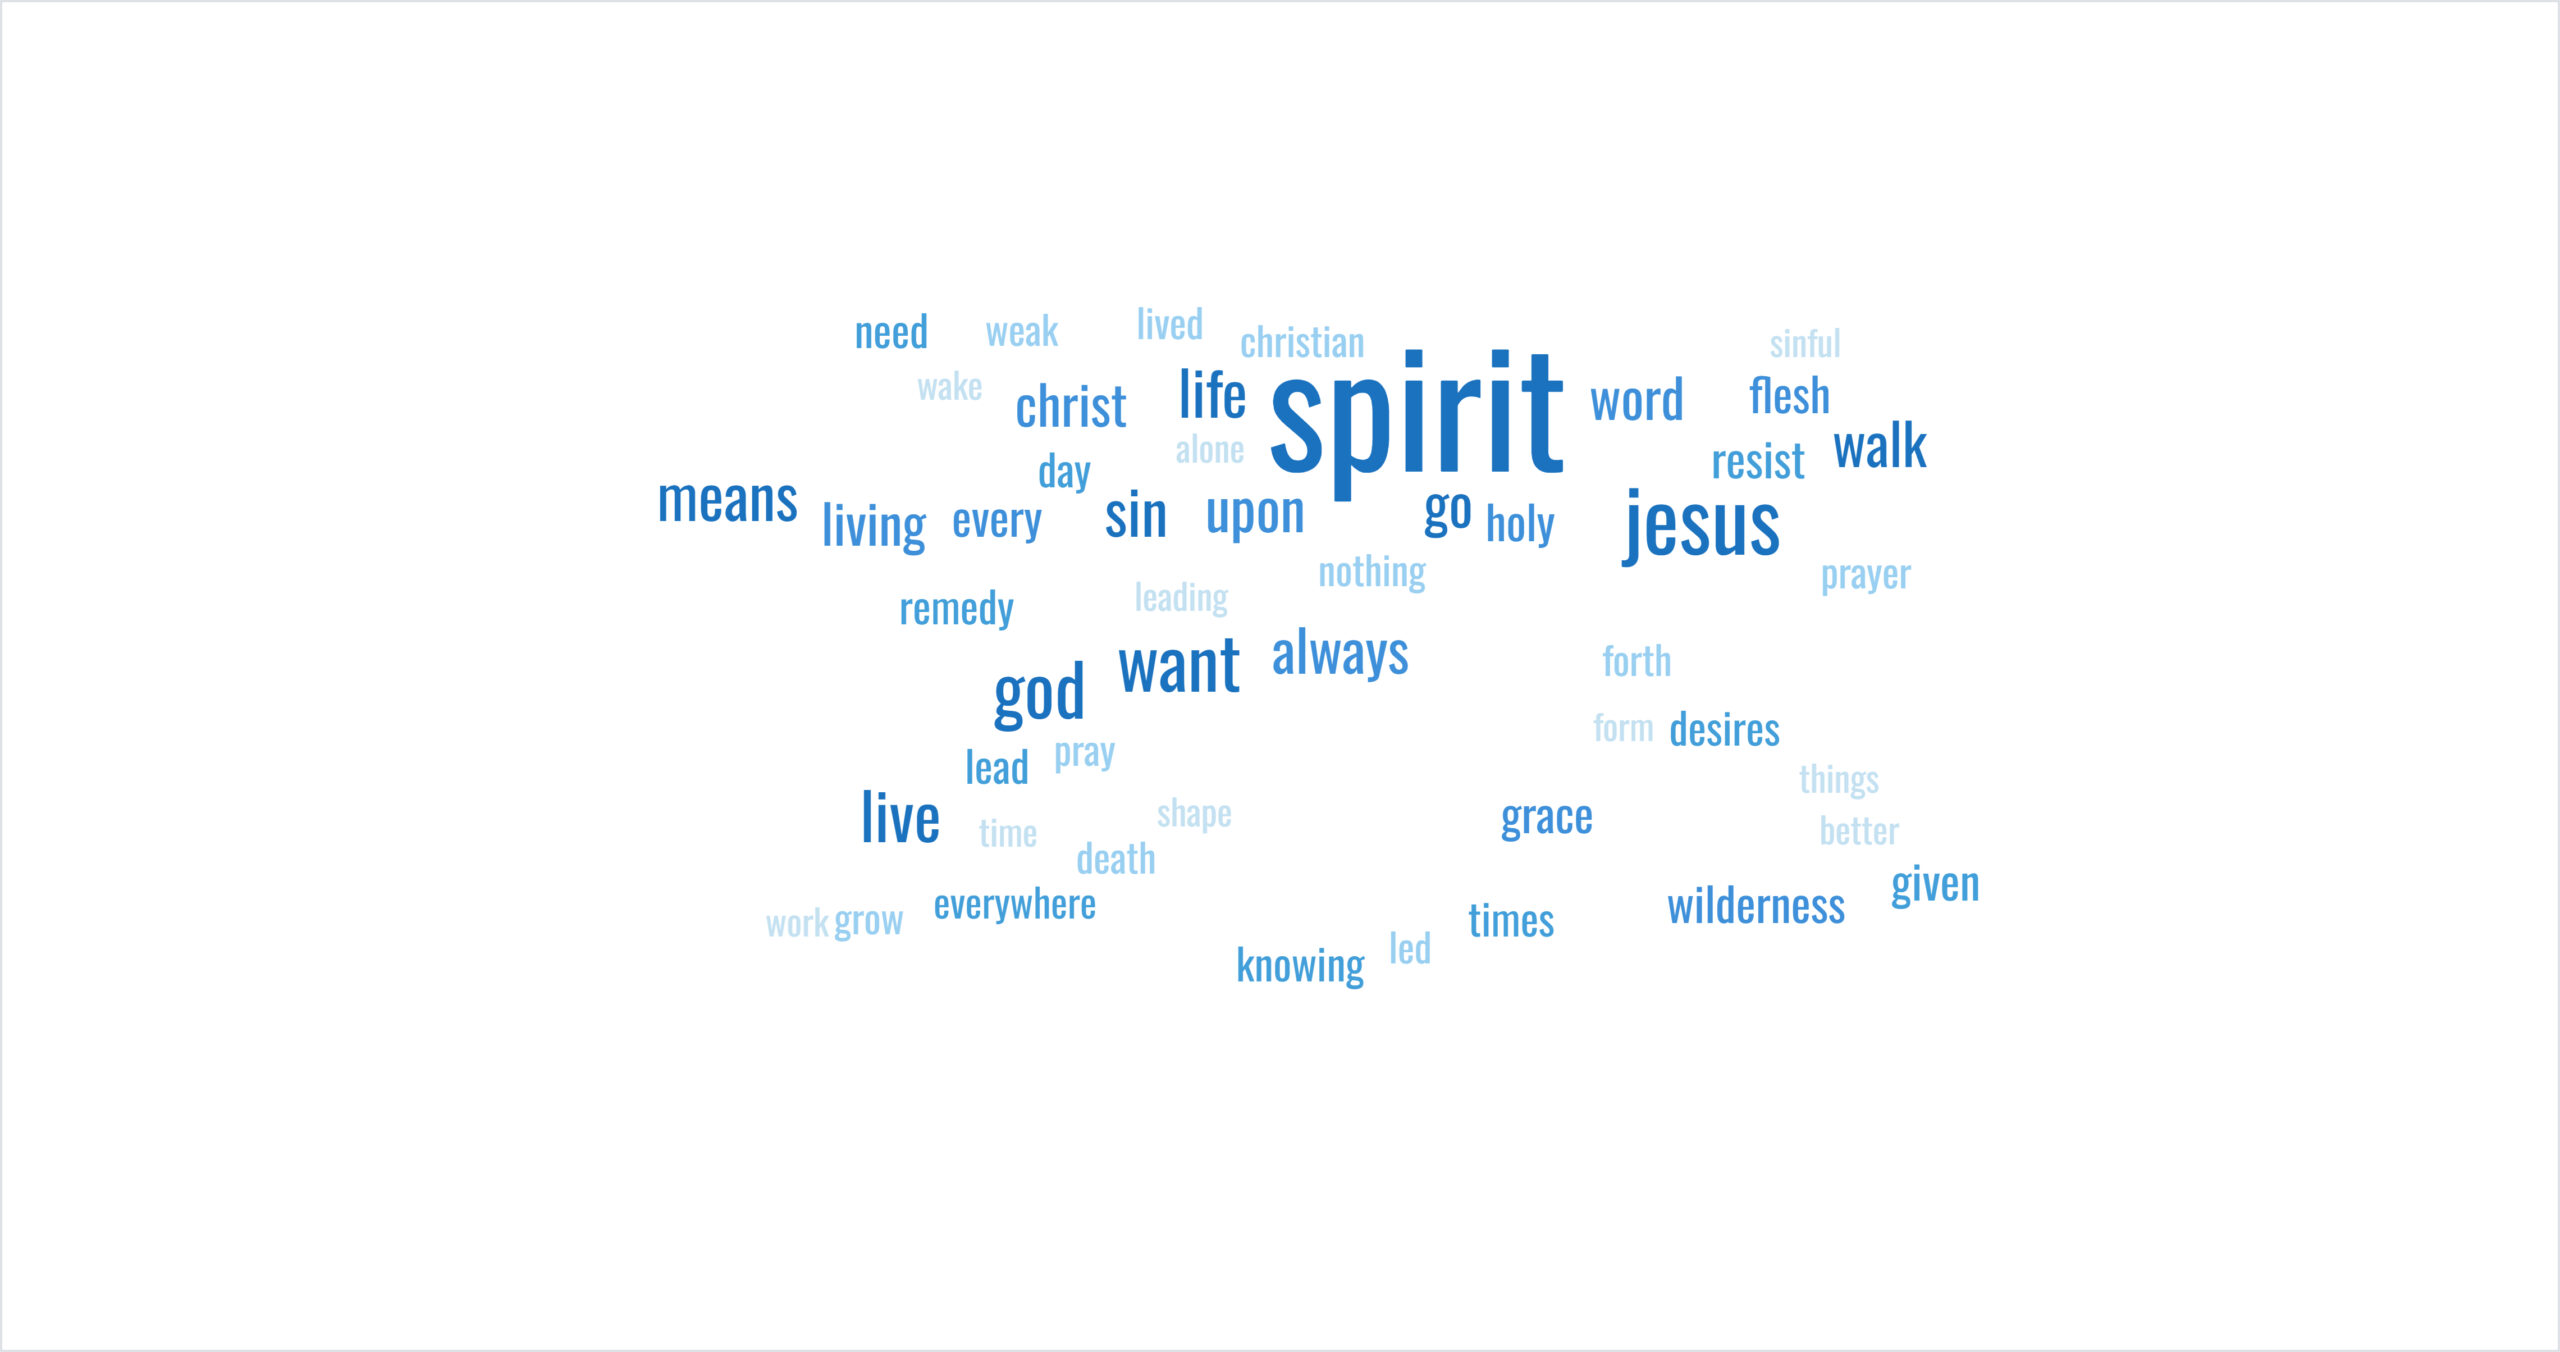 Galatians 5:16 Meaning: “Walk in the Spirit”